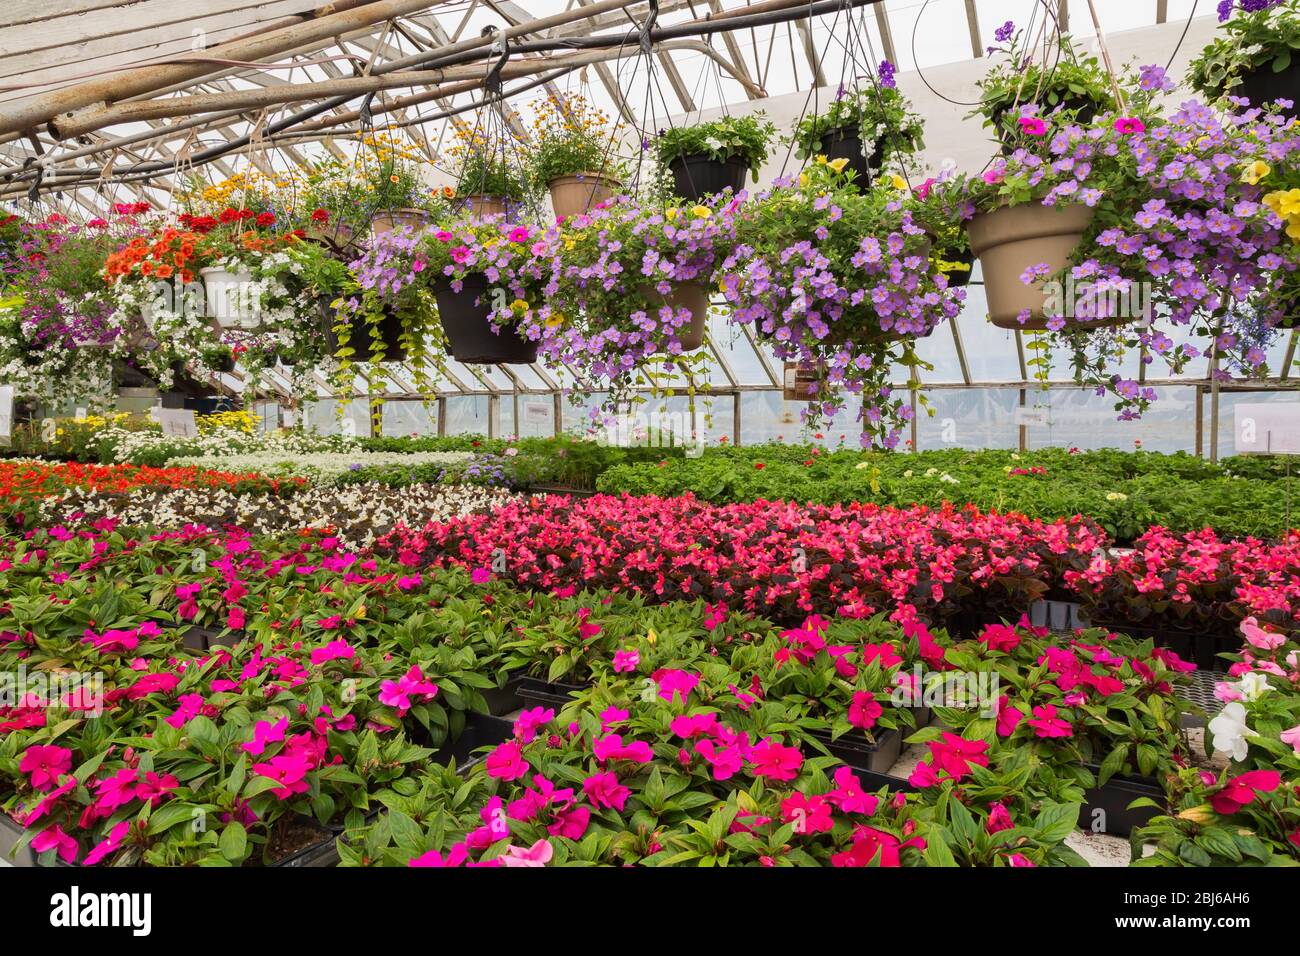 Colourful Annual Summer Flowers Hanging In Baskets And Pink Latinloc1 Latin1 Pink White And Red Latinloc2 Latin2 In Greenhouse Quebec Canada Stock Photo Alamy